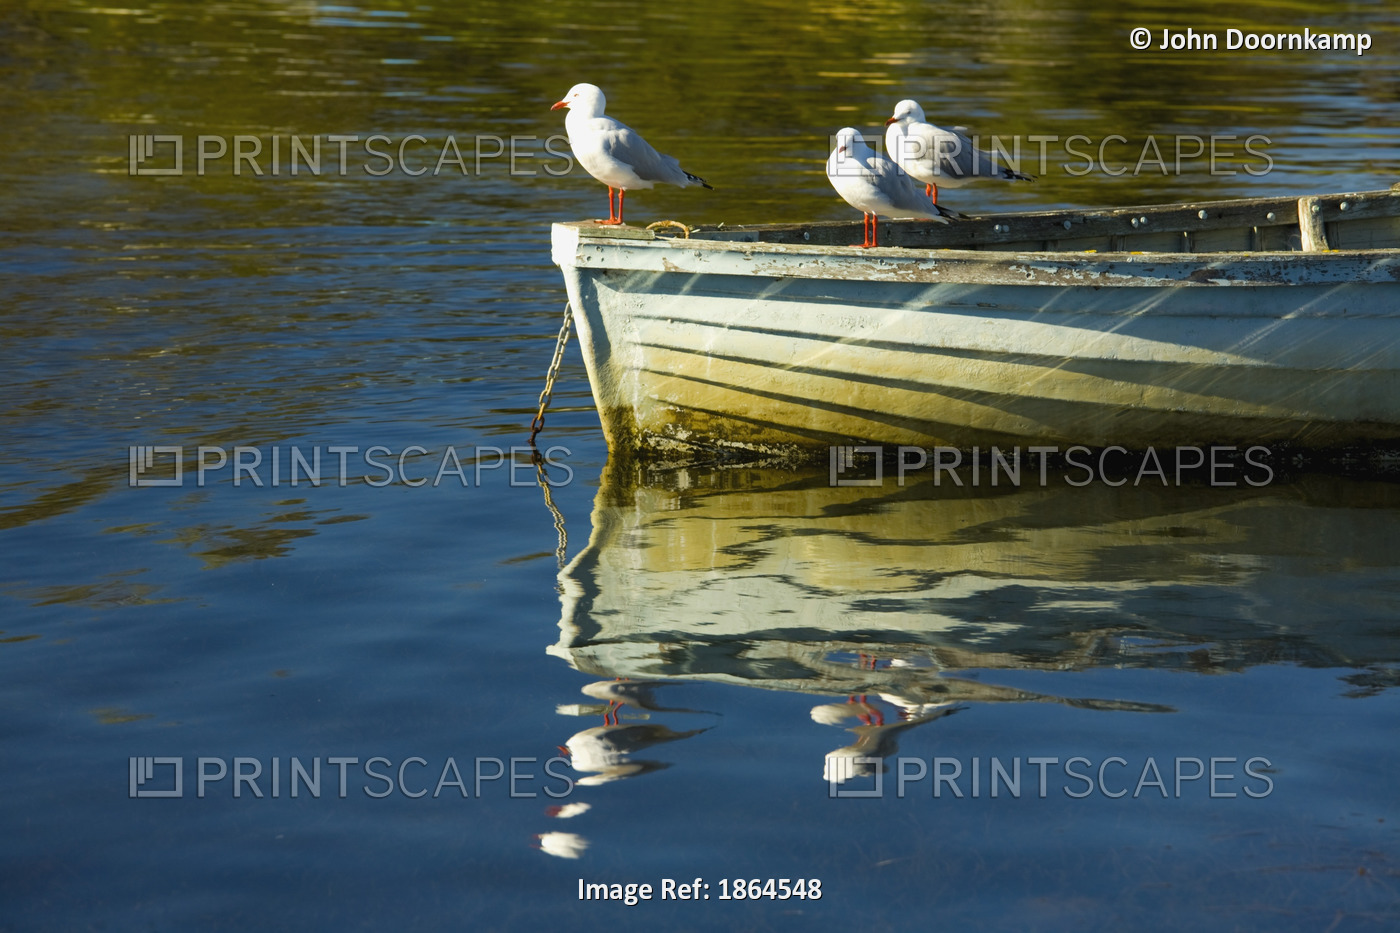 Seagulls Perched On A Boat